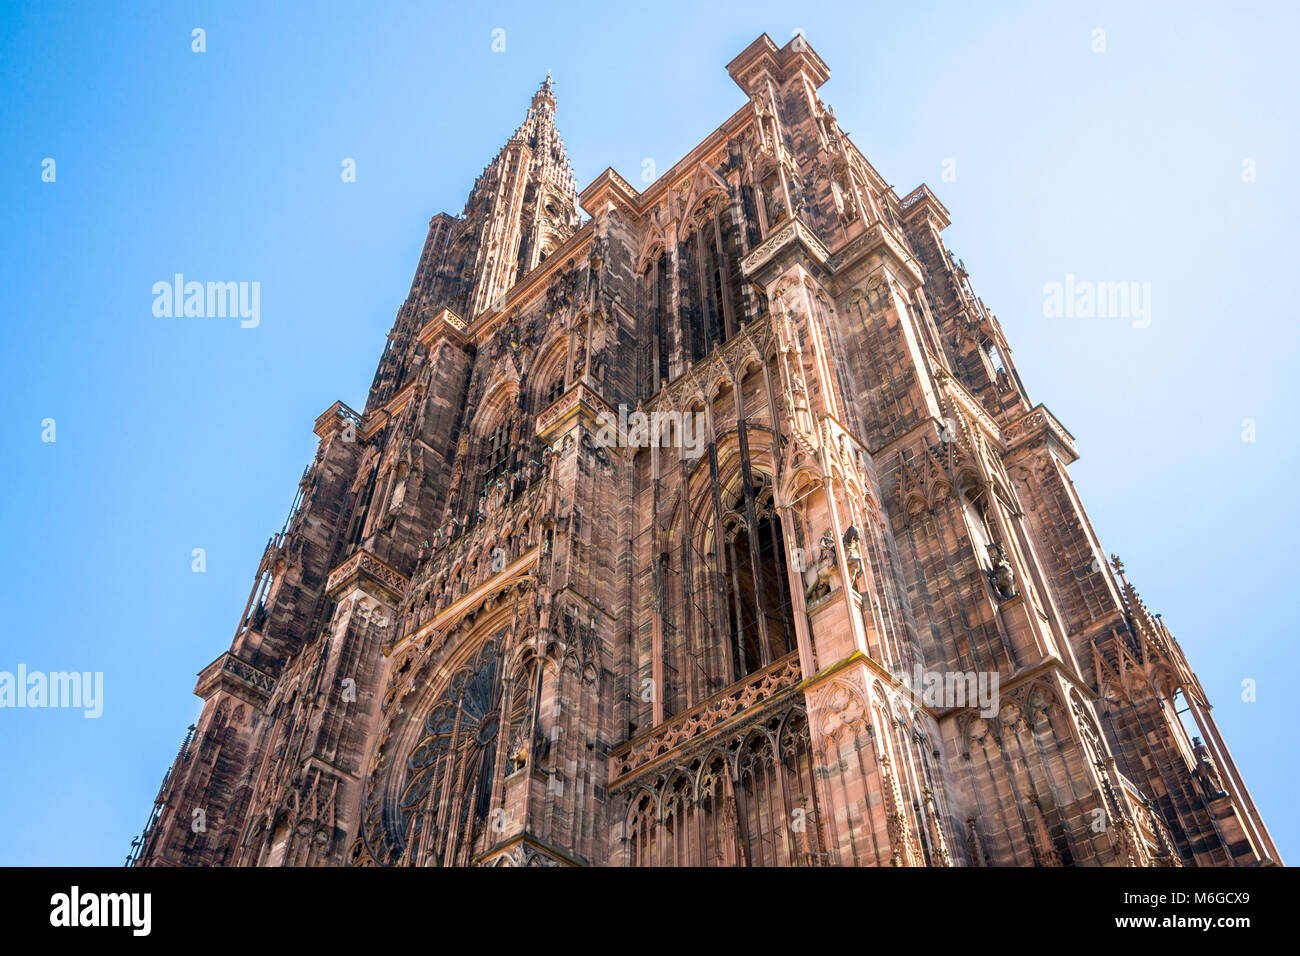 The Cathedral of Our Lady of Strasbourg (Notre-Dame), a Roman Catholic cathedral in Strasbourg, Alsace, France. World's tallest building from 1647 to  Stock Photo